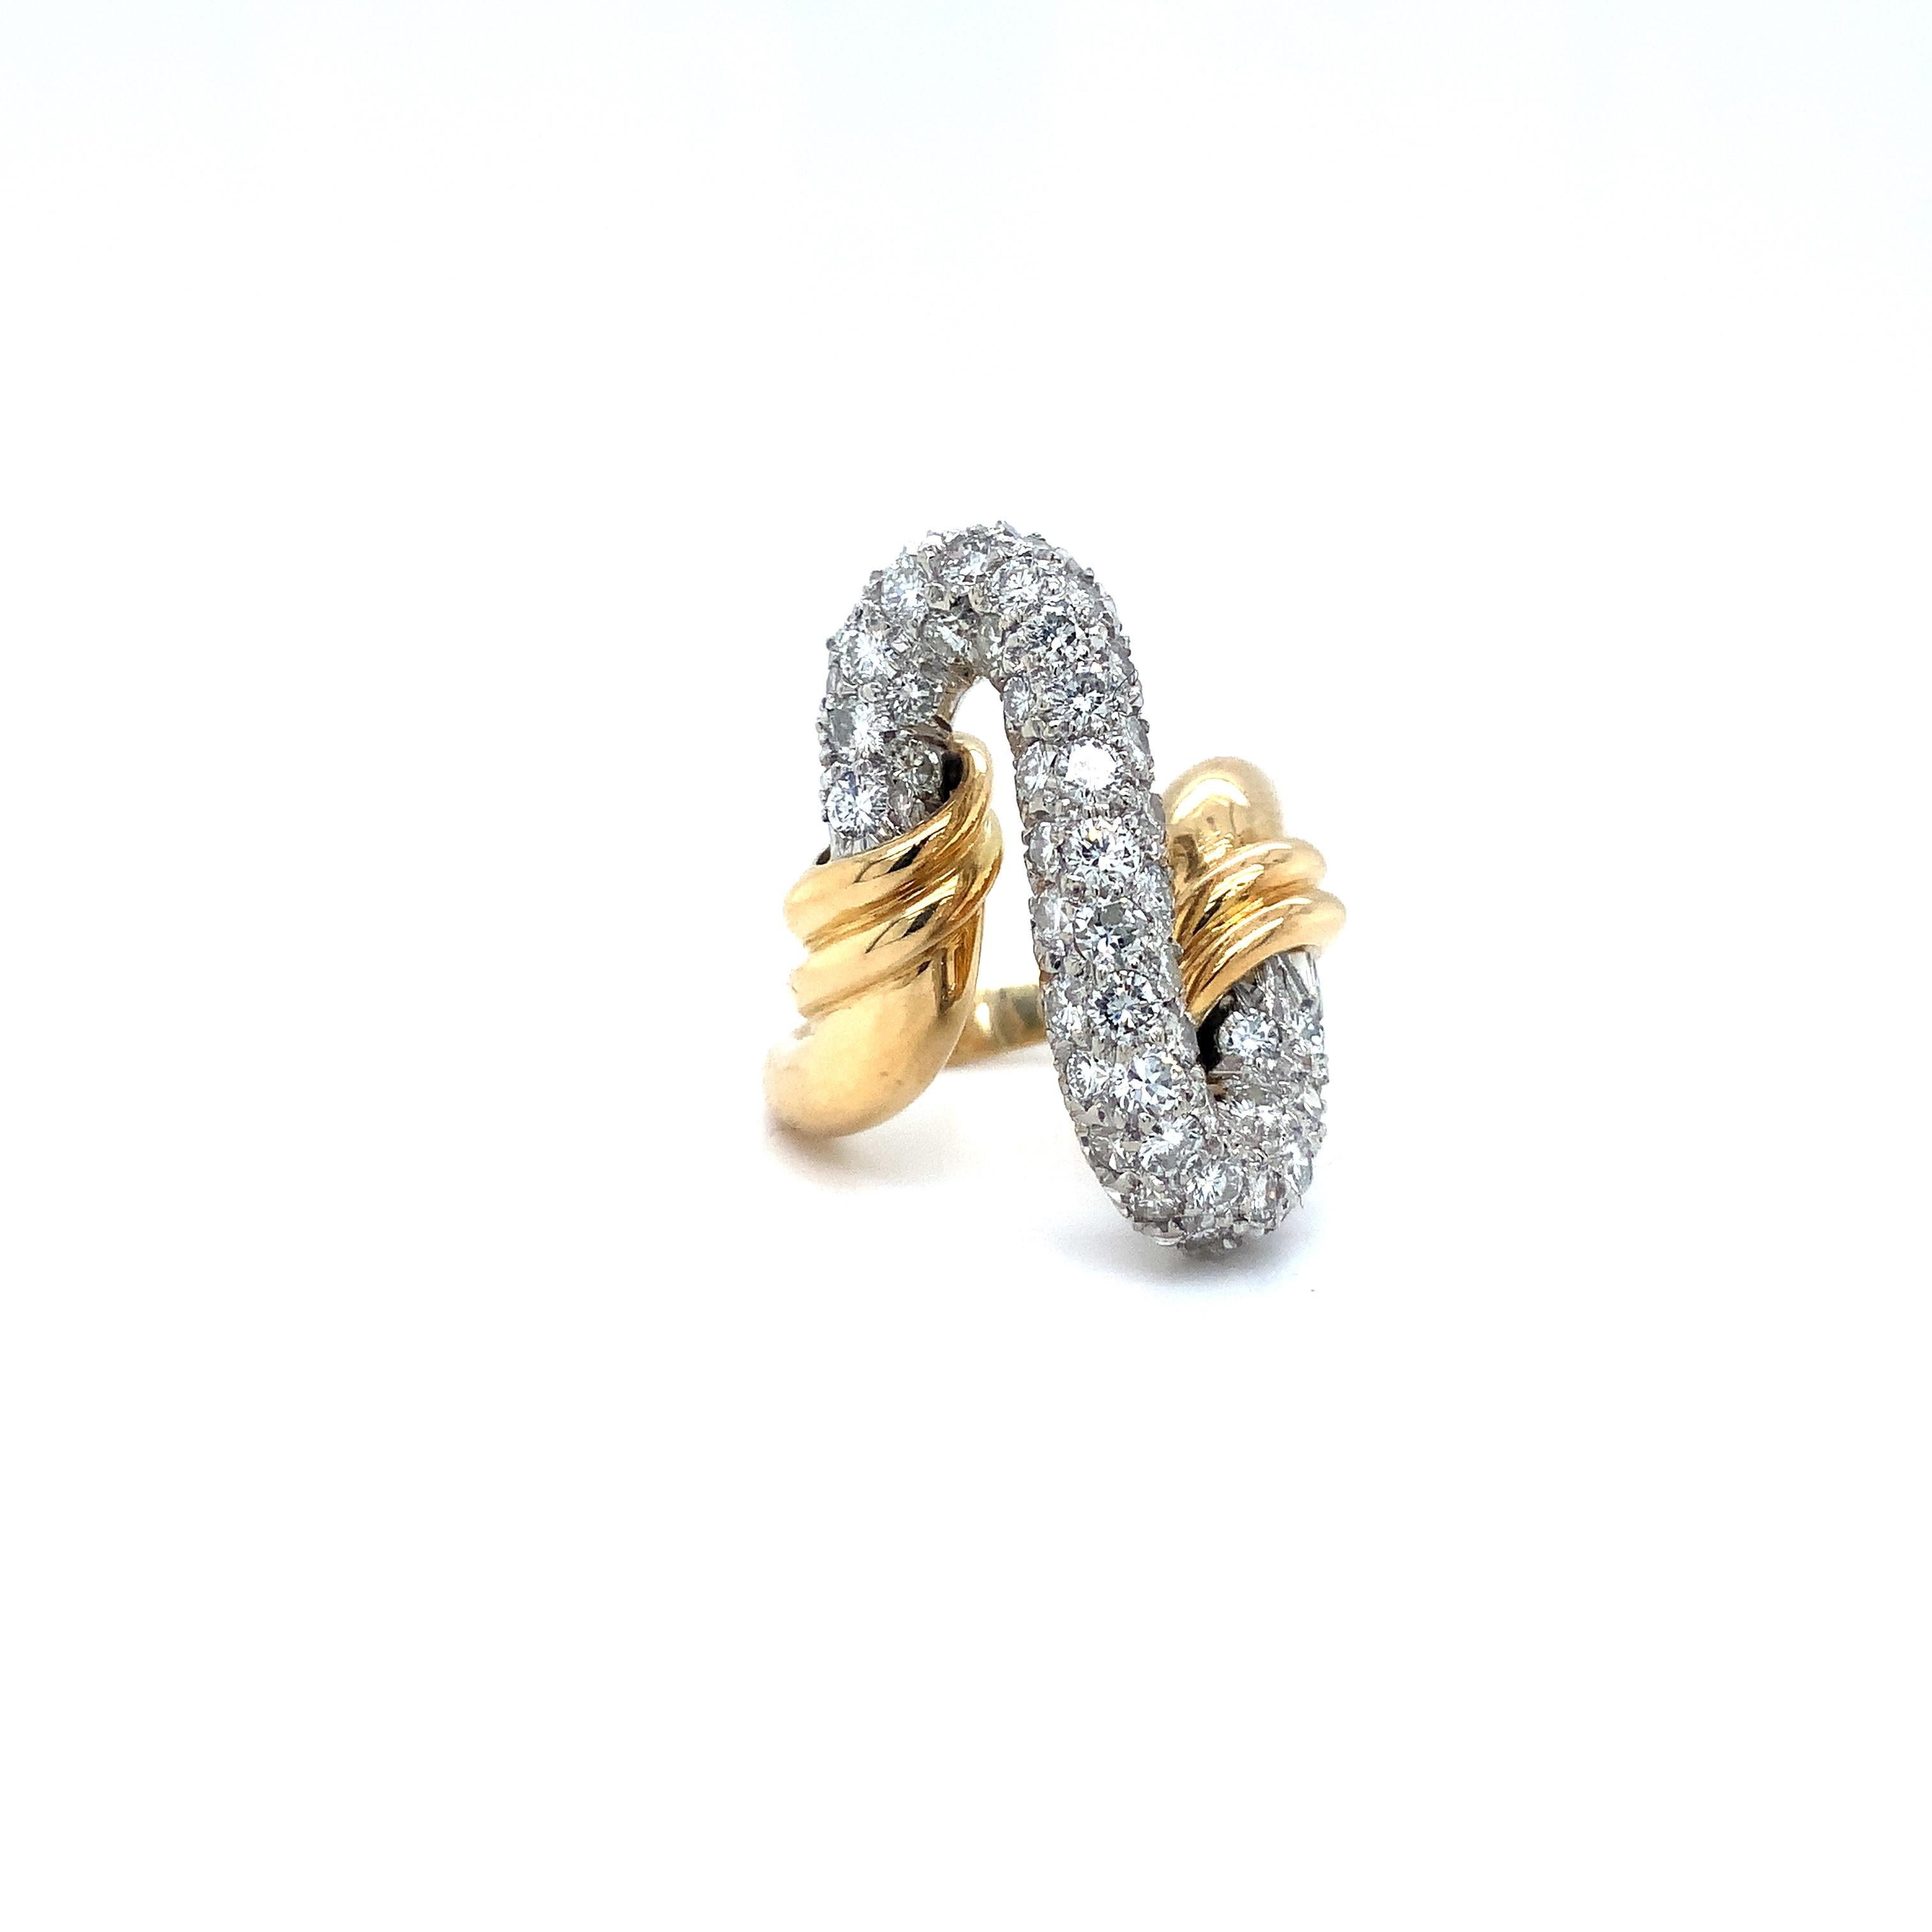 Modern Vintage Pave Diamond Ring Fashioned in 18 kt Yellow and White Gold. For Sale